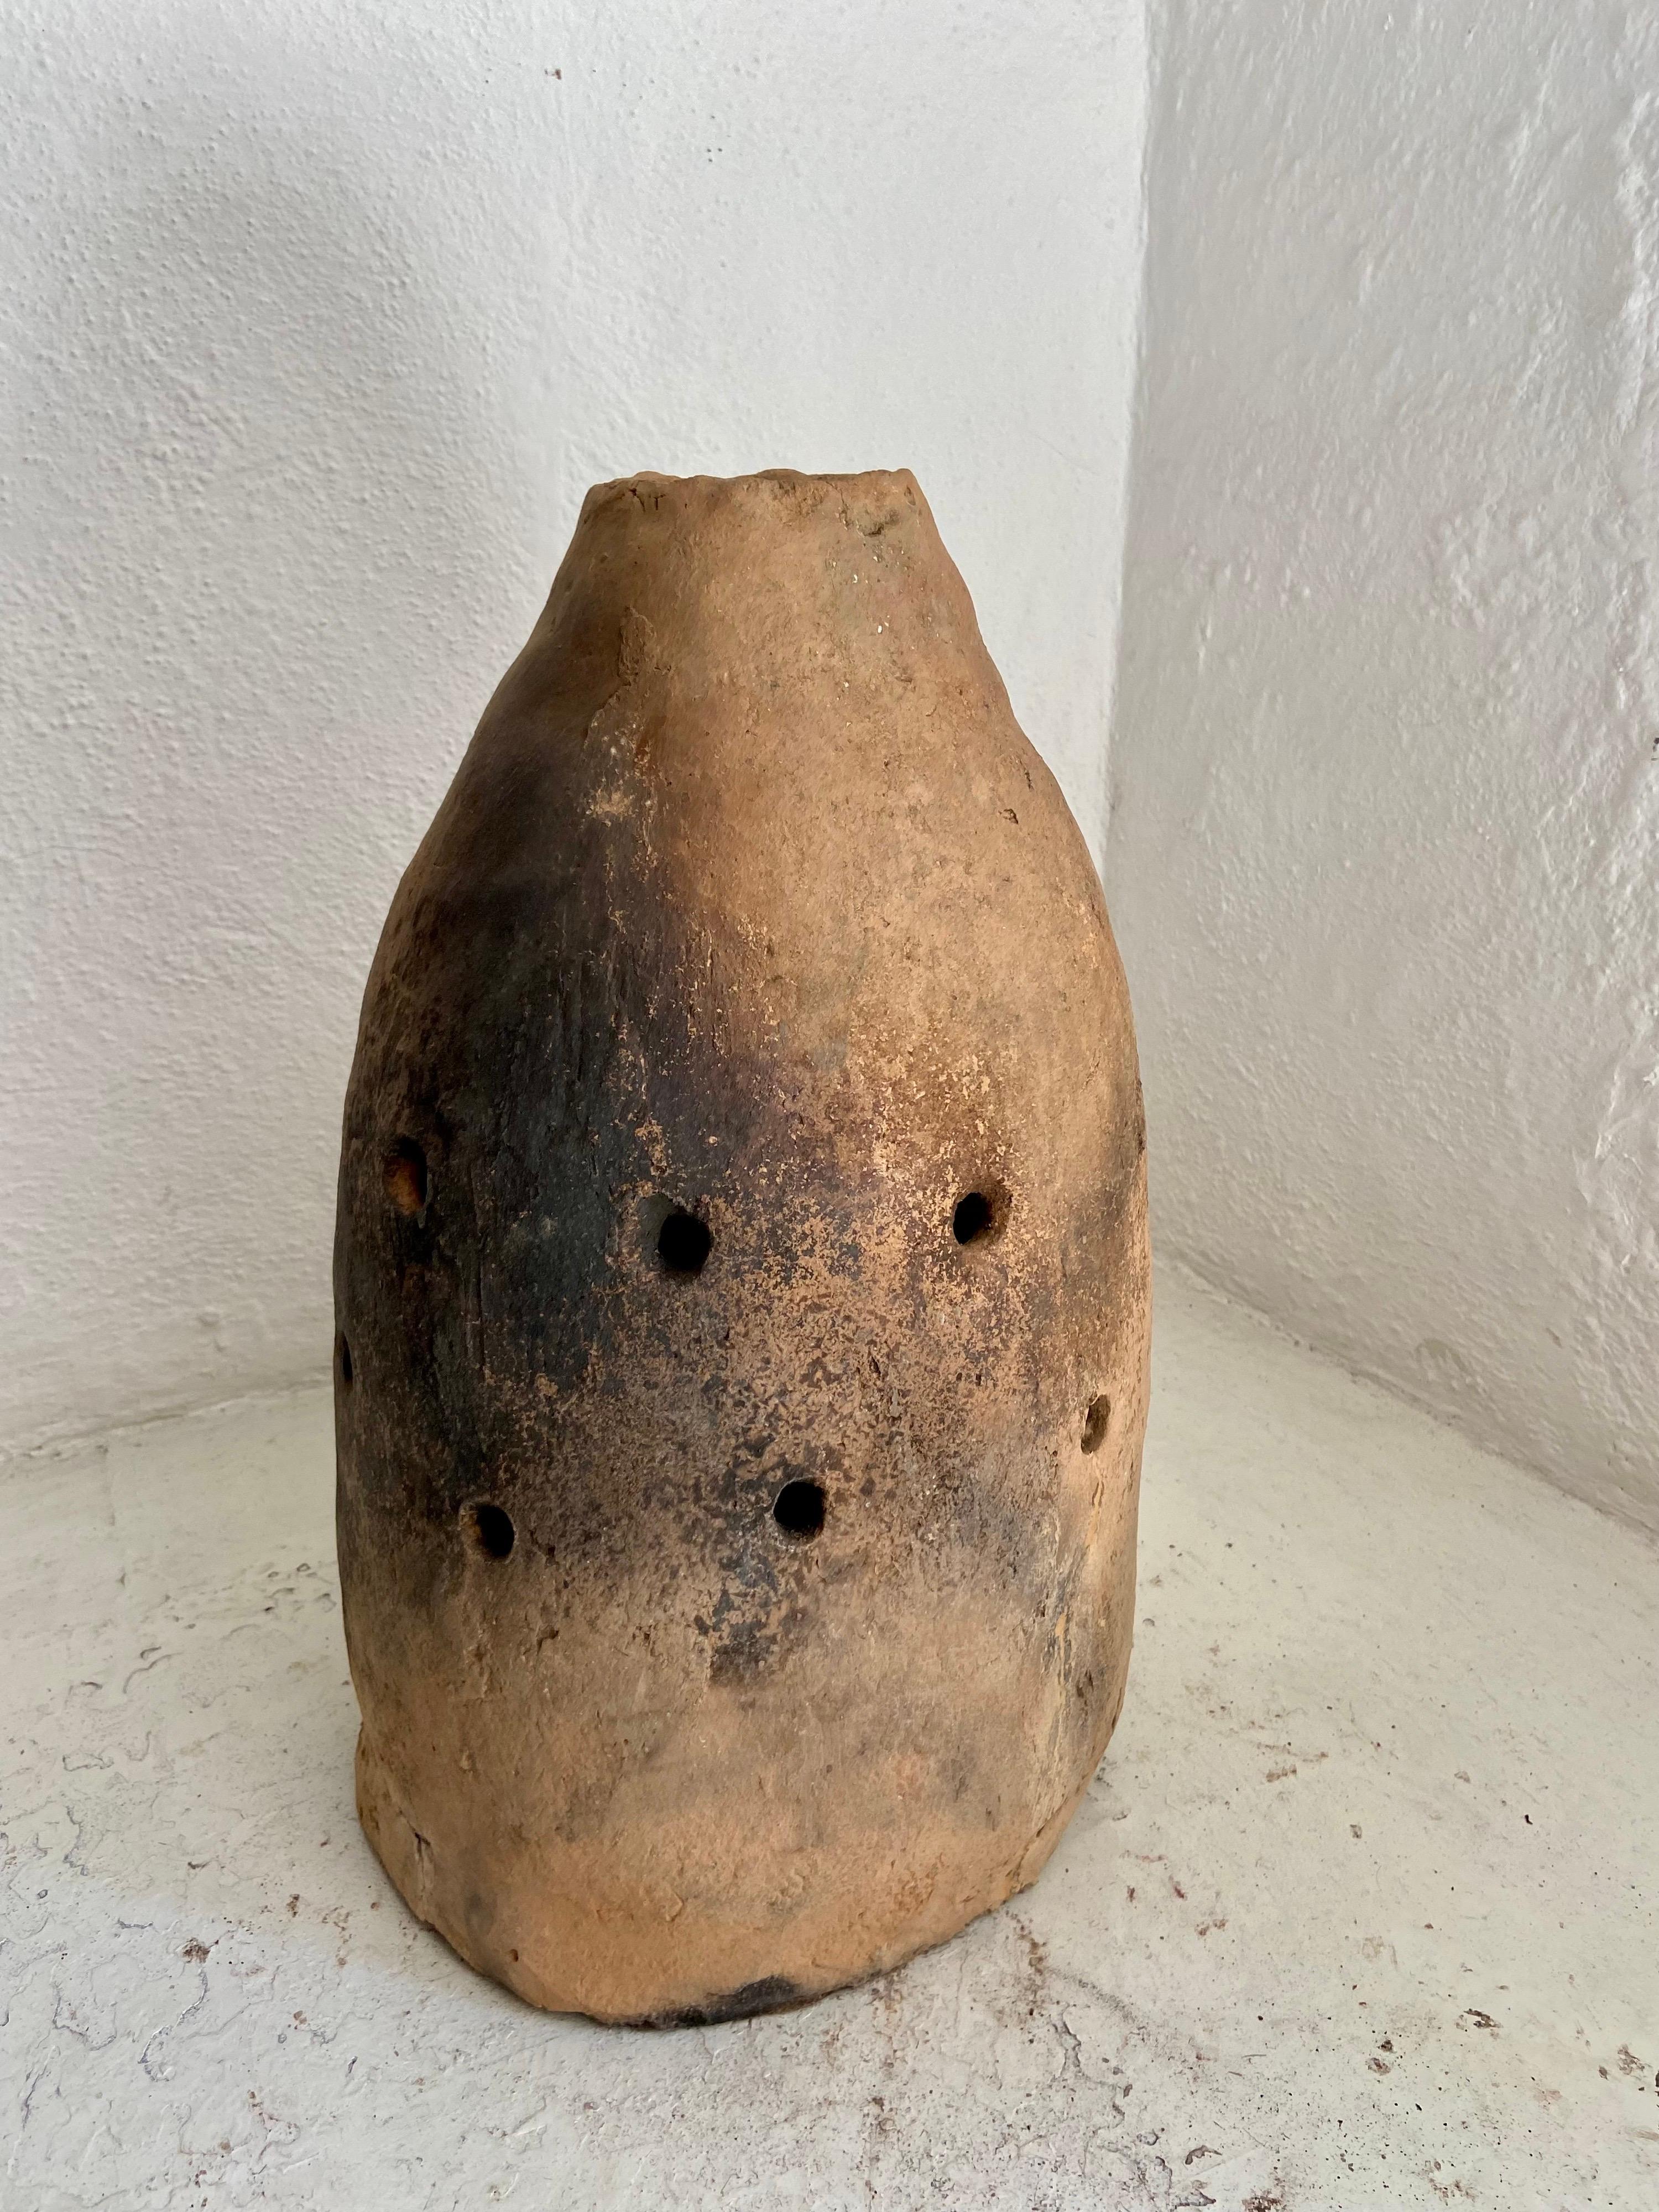 Ceramic Early 20th Century Terracotta Dome Heater from a Remote Mexican Village